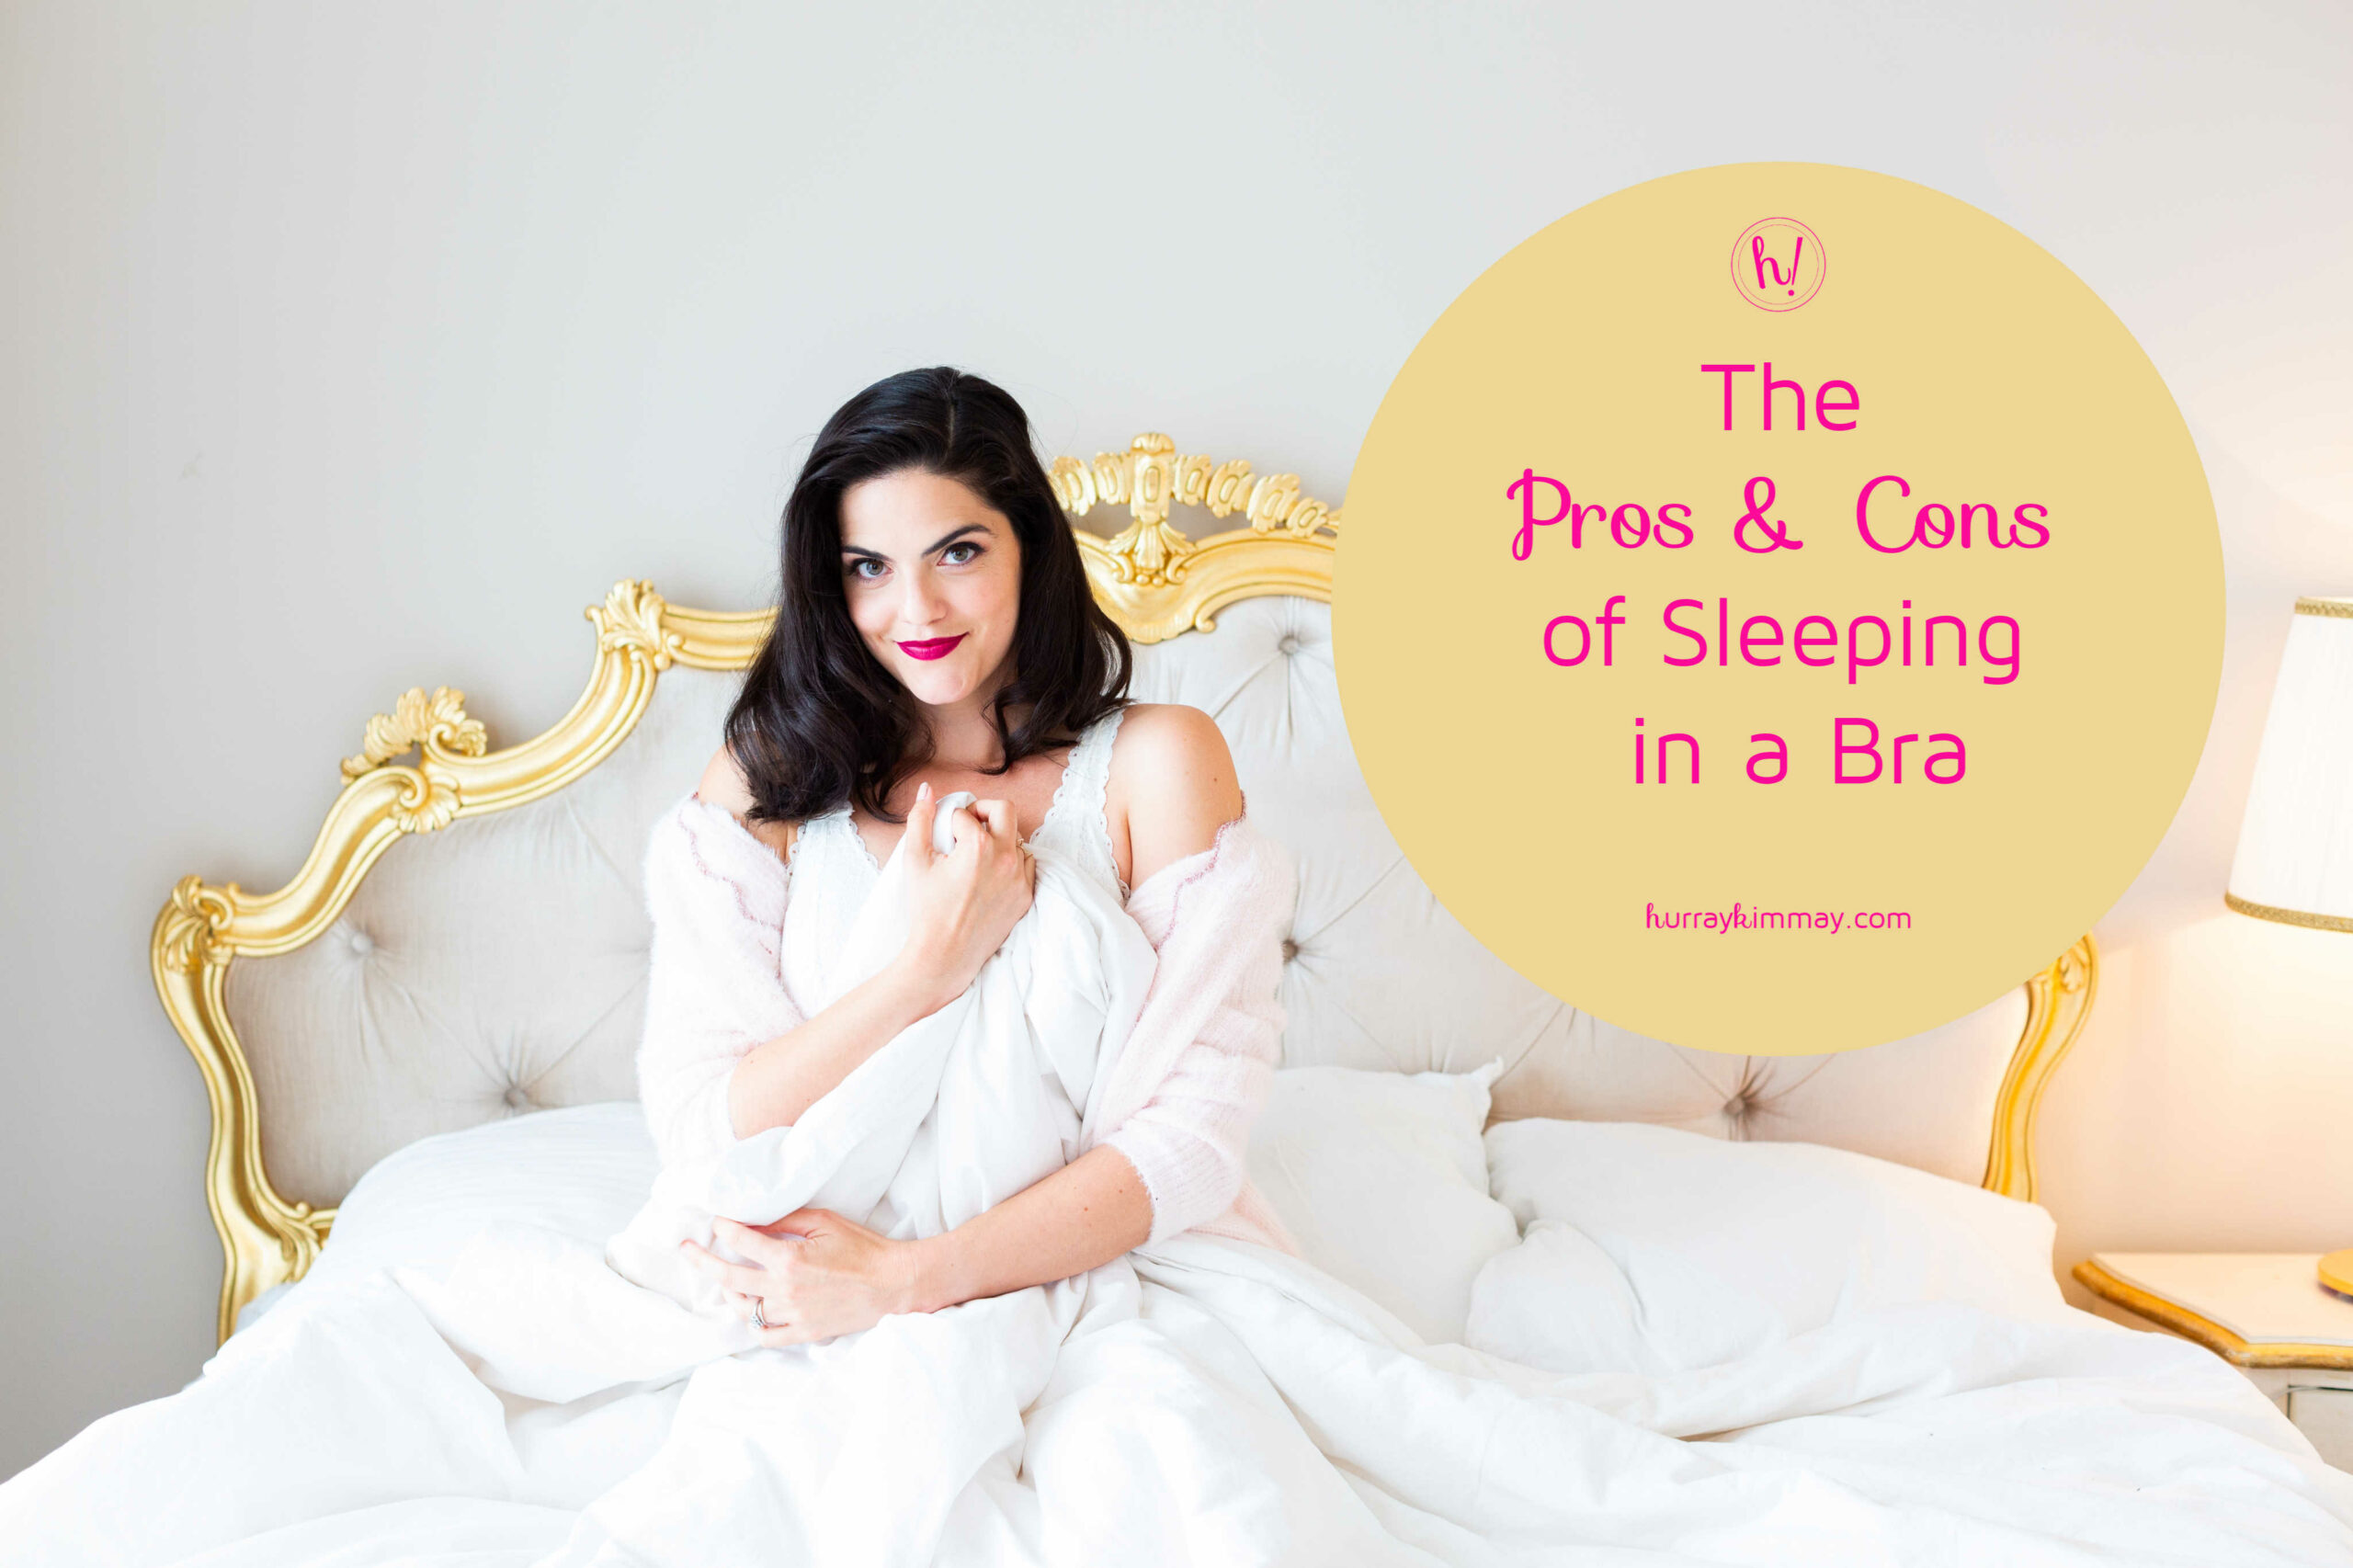 Is Sleeping In A Bra Good For You? The Answer Is A Bit Complicated